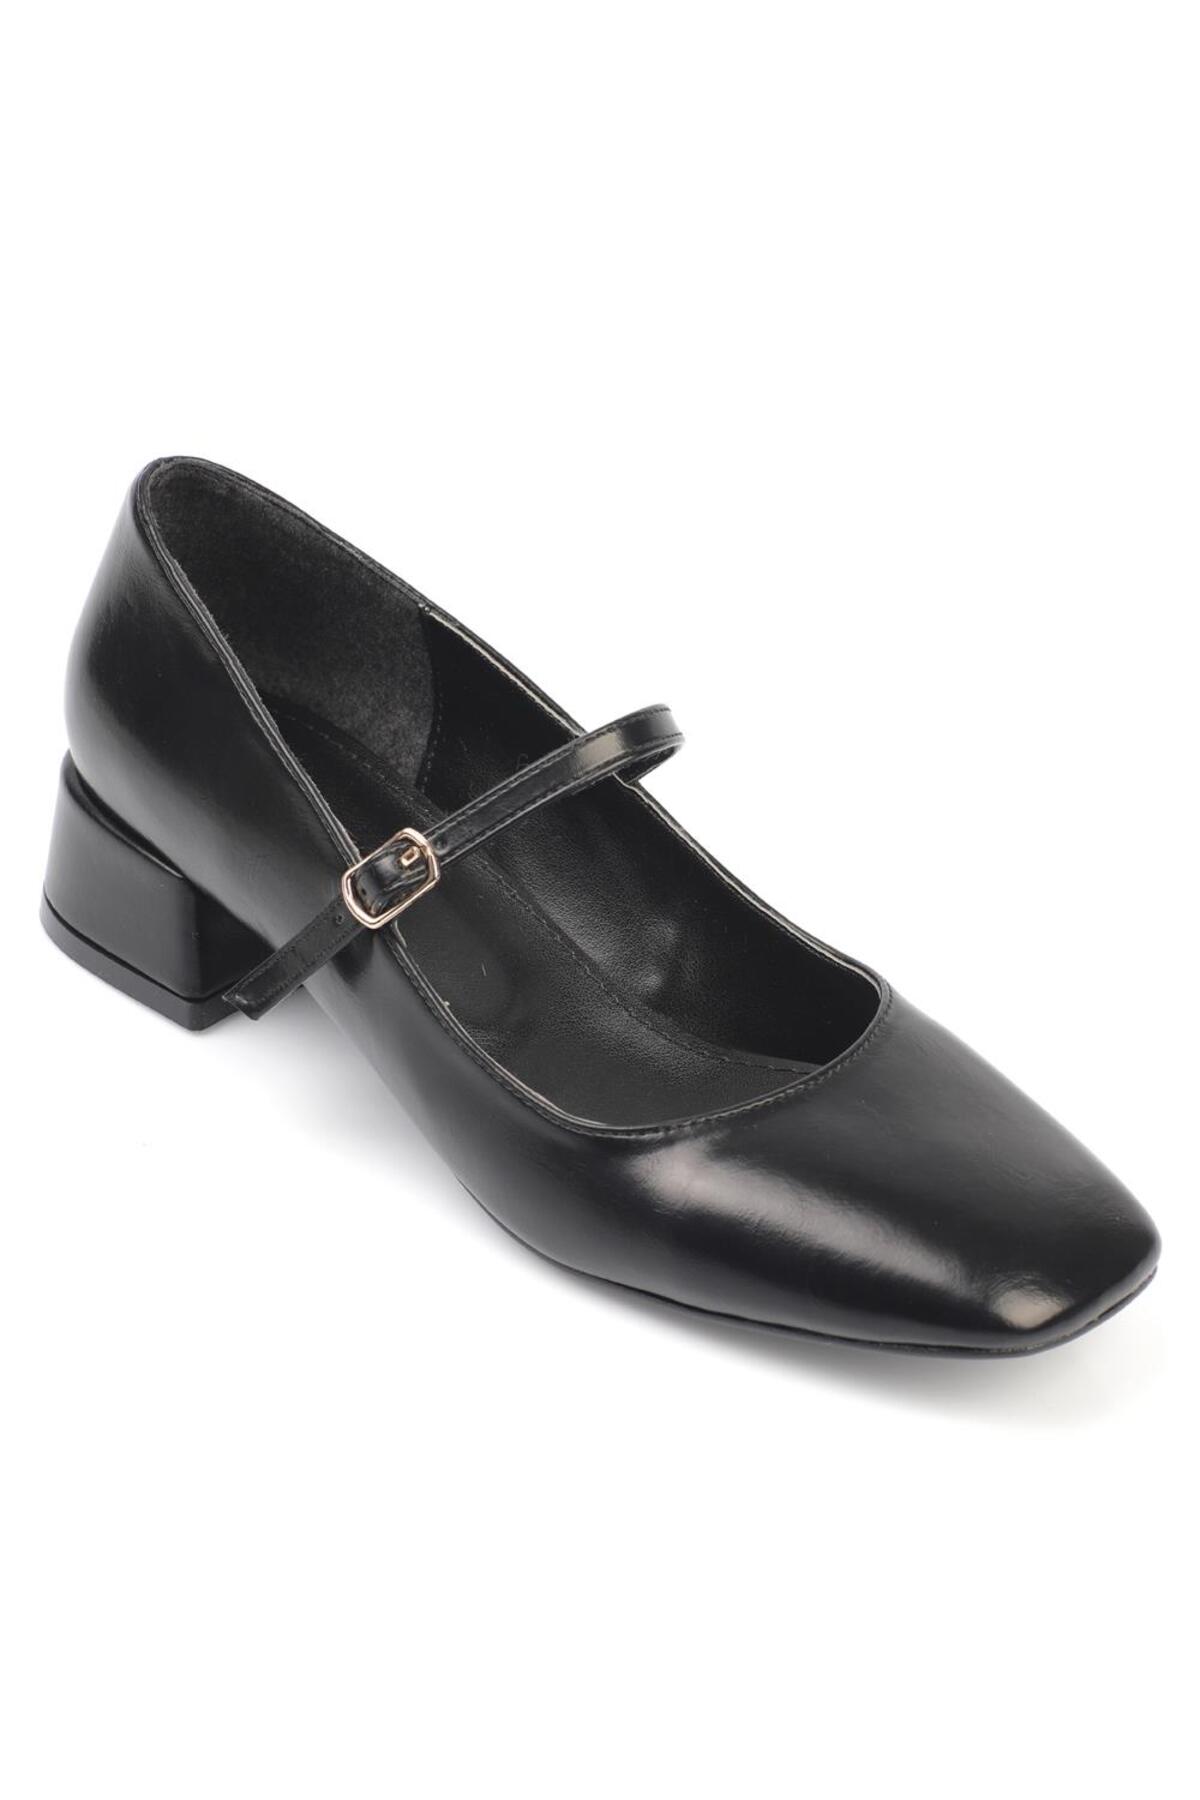 Levně Capone Outfitters Capone Flat Toe Strapless Low Heel Women's Shoes